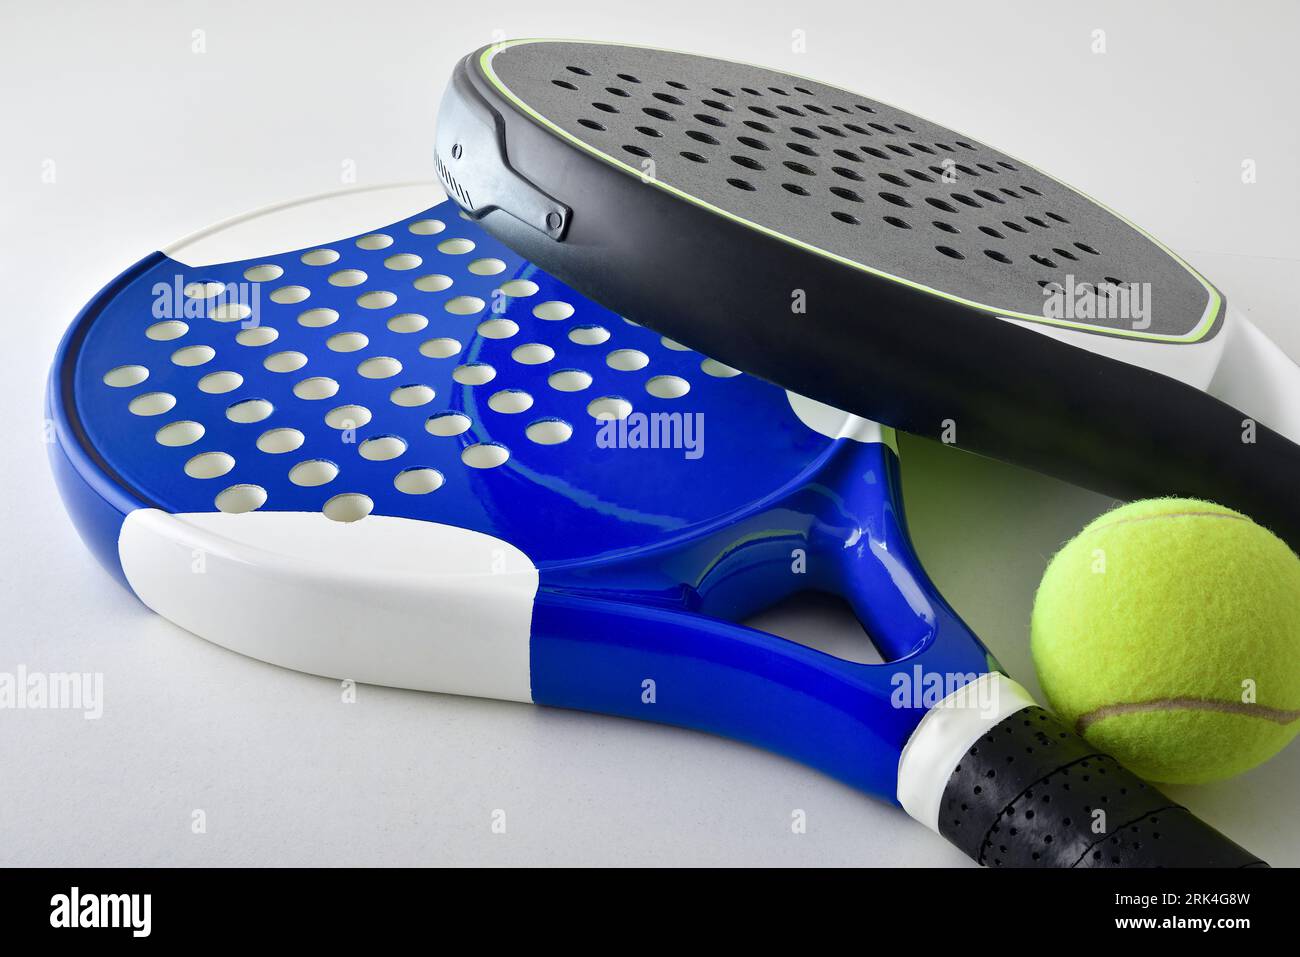 Background with two blue and black paddle rackets on a white table with ball. Elevated view. Stock Photo